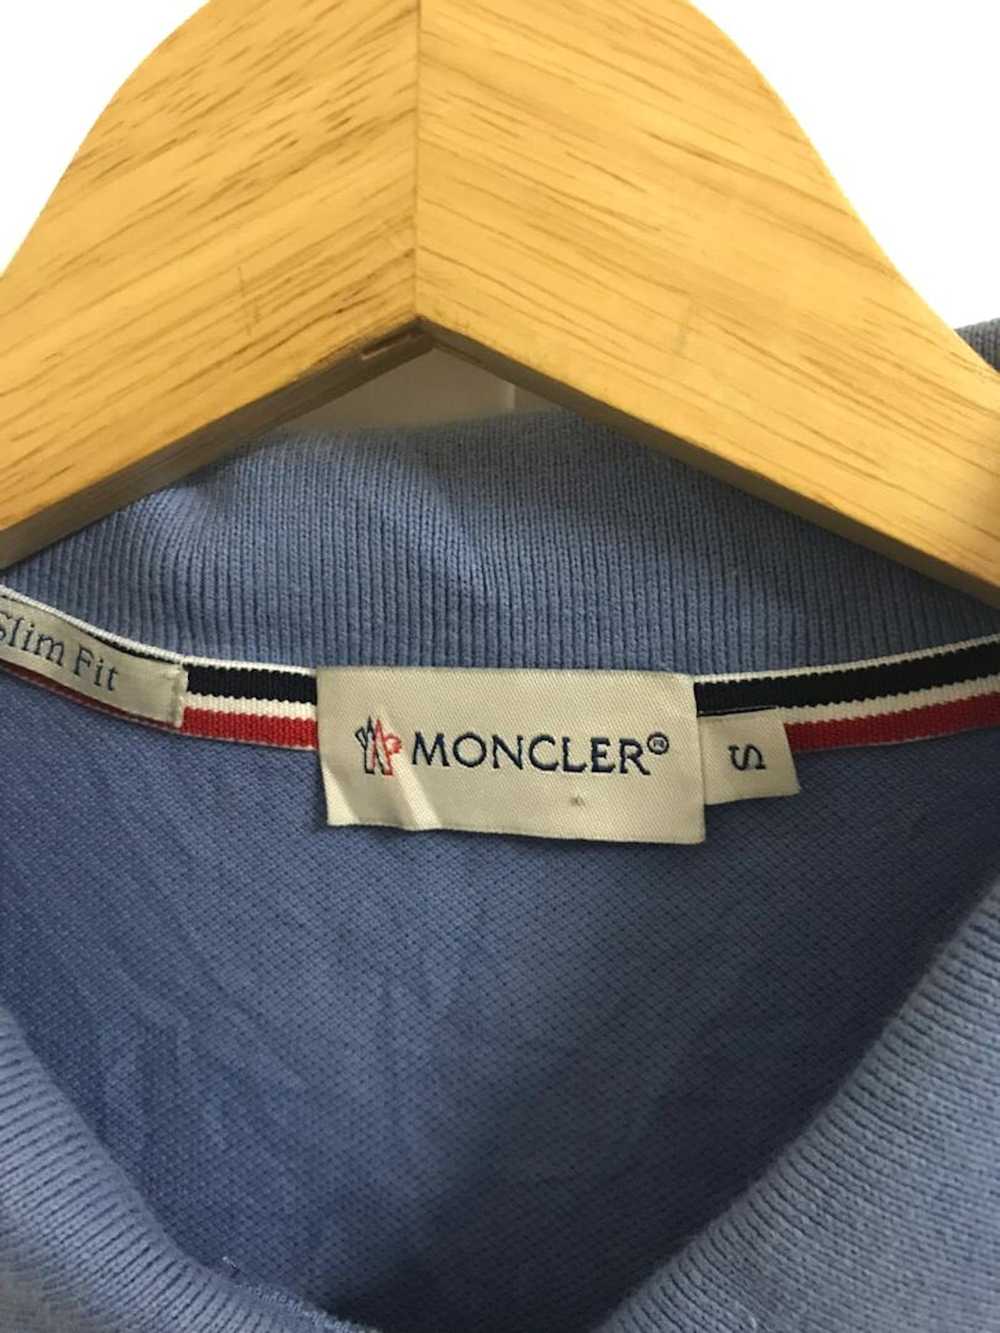 Moncler Need Gone Today Moncler Polo Slim Fit Siz… - image 6